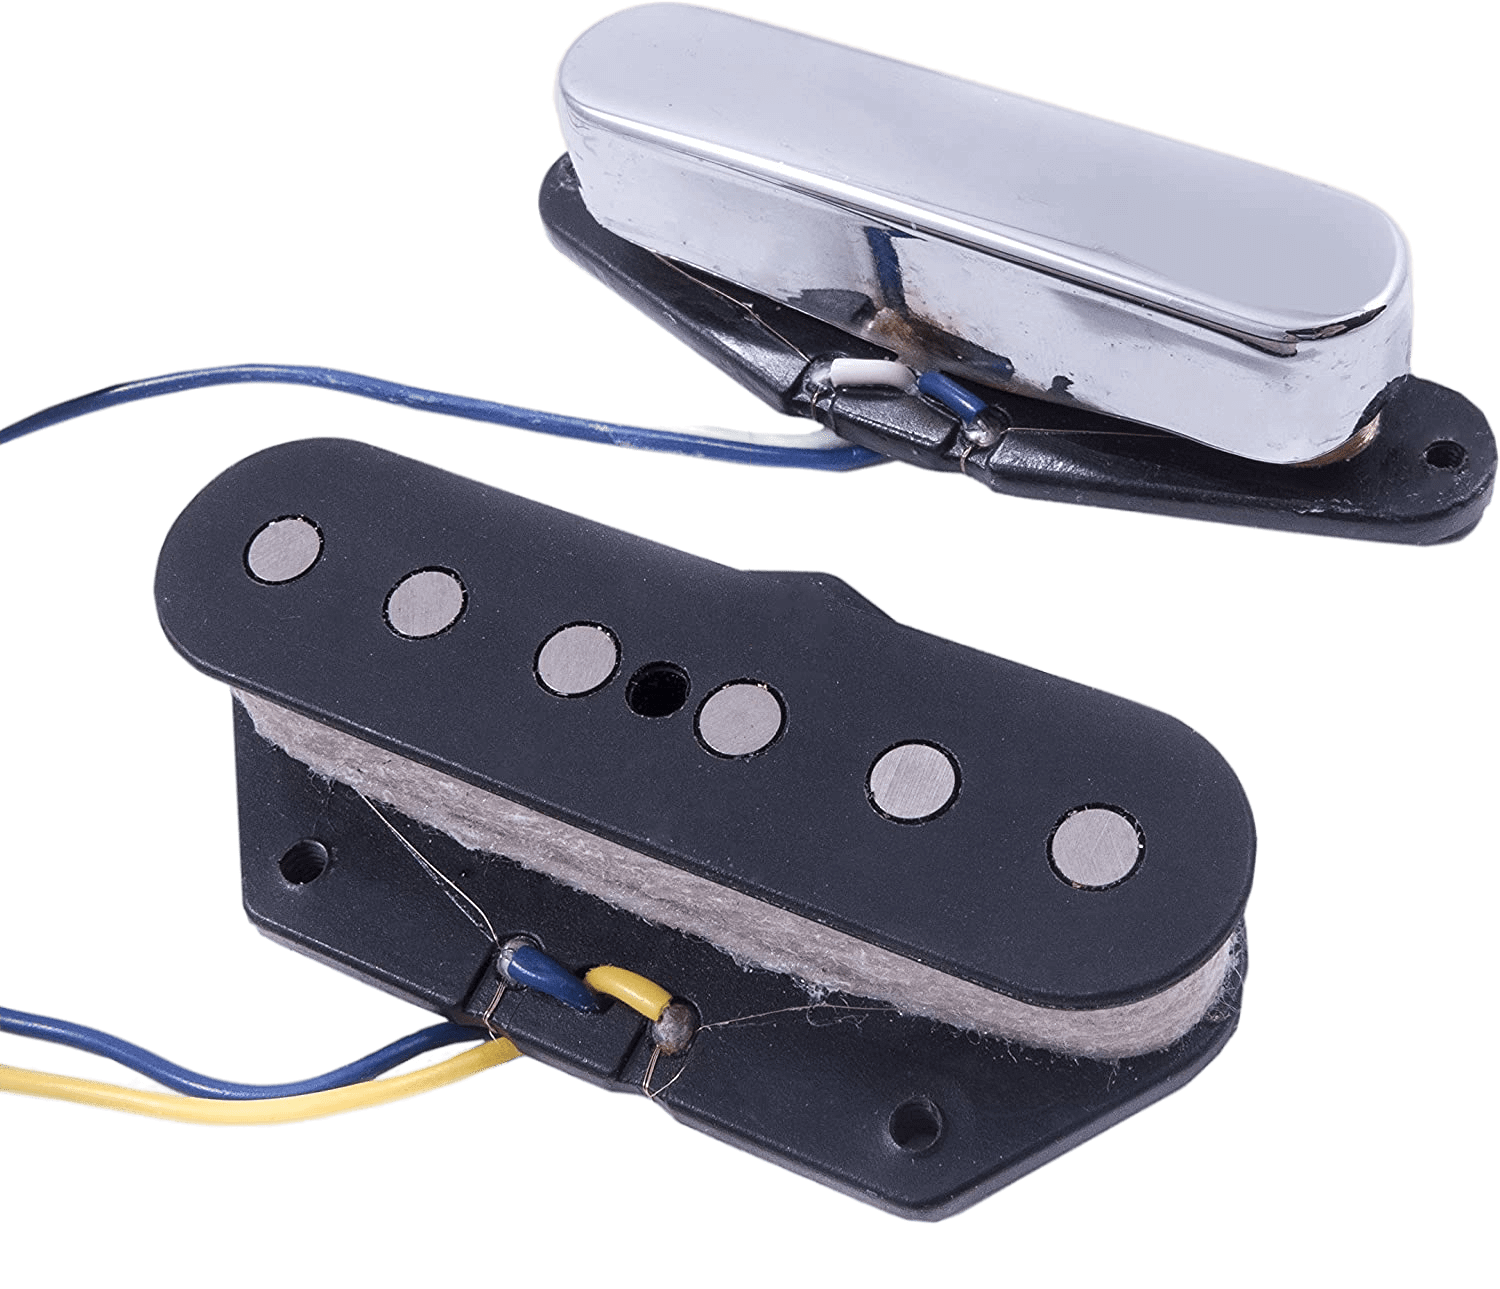 Fender Deluxe Drive Telecaster Pickup on a white background